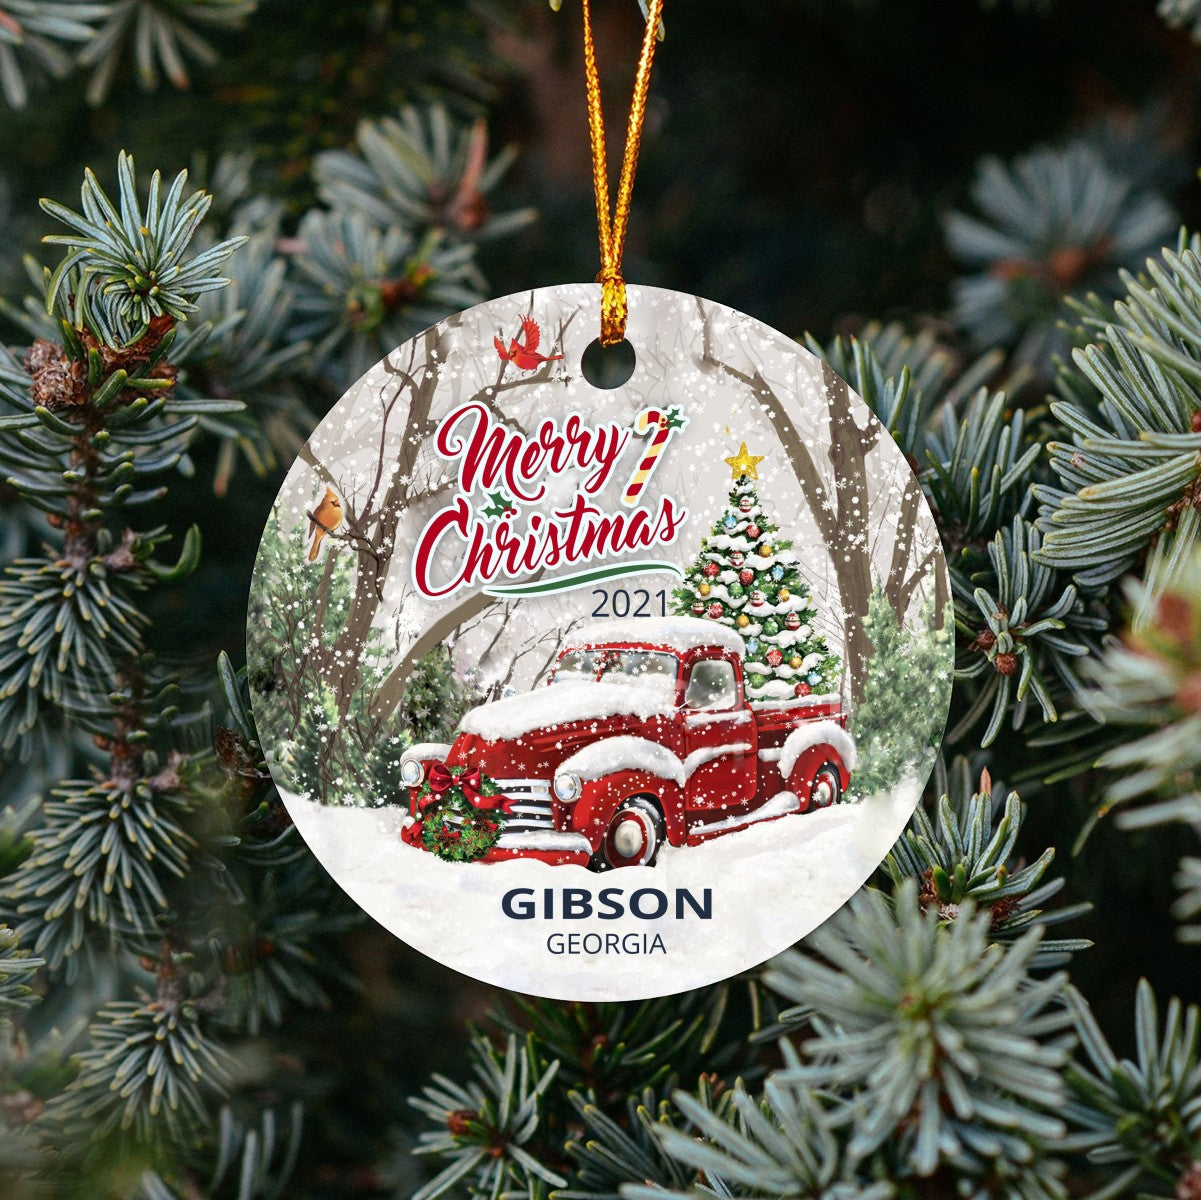 Christmas Tree Ornaments Gibson - Ornament With Name City, State Gibson Georgia GA Ornament - Red Truck Xmas Ornaments 3'' Plastic Gift For Family, Friend And Housewarming